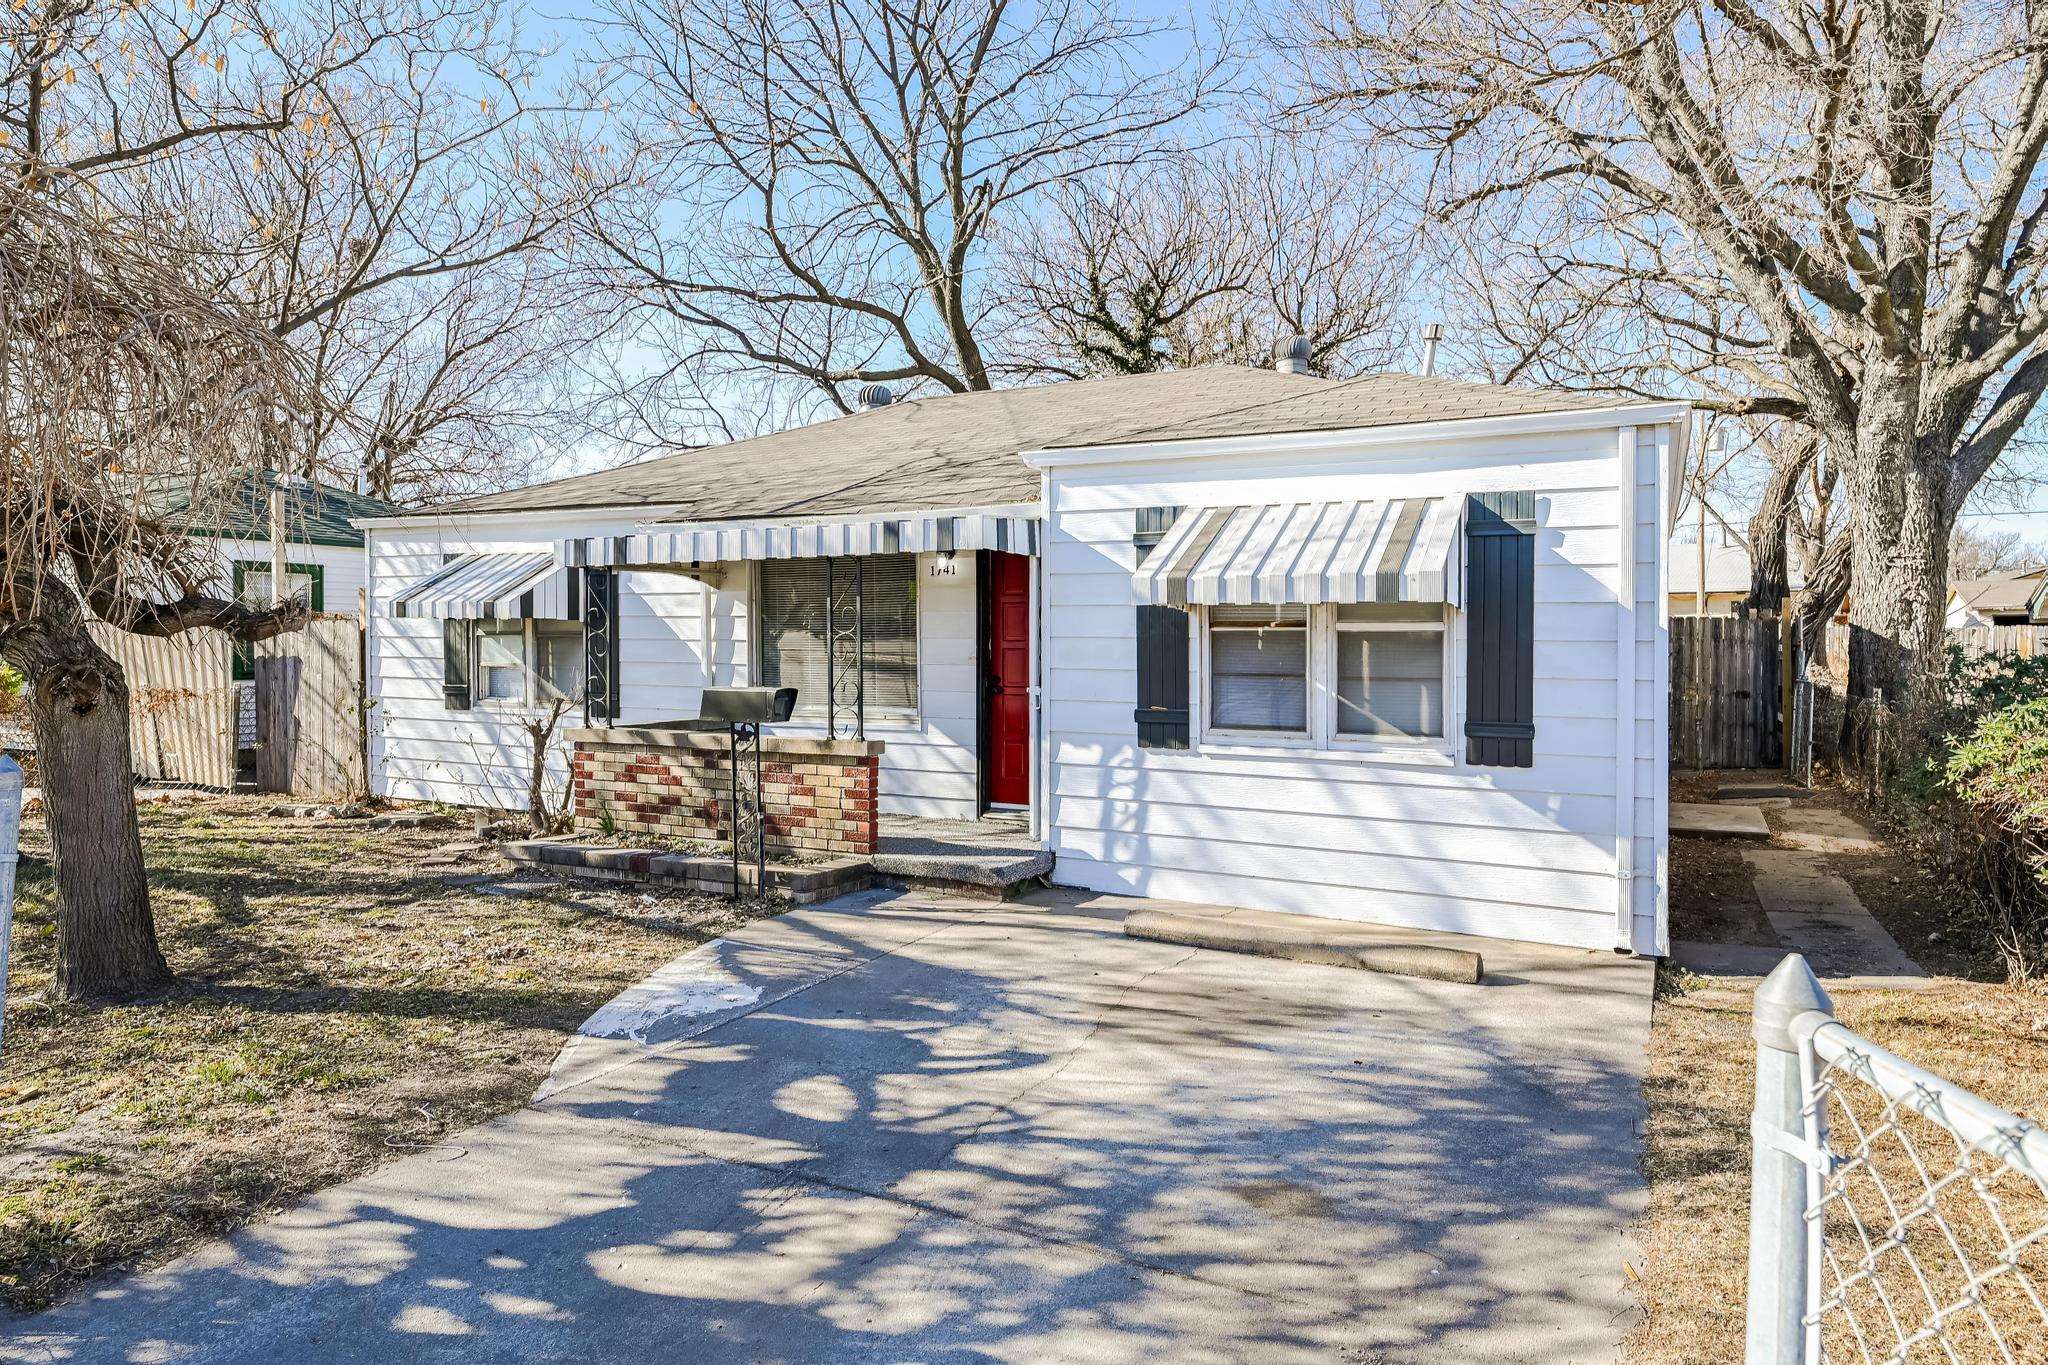 Welcome home to this nicely remodeled 3 bed, 1 bath ranch in south Wichita. Great opportunity for a 